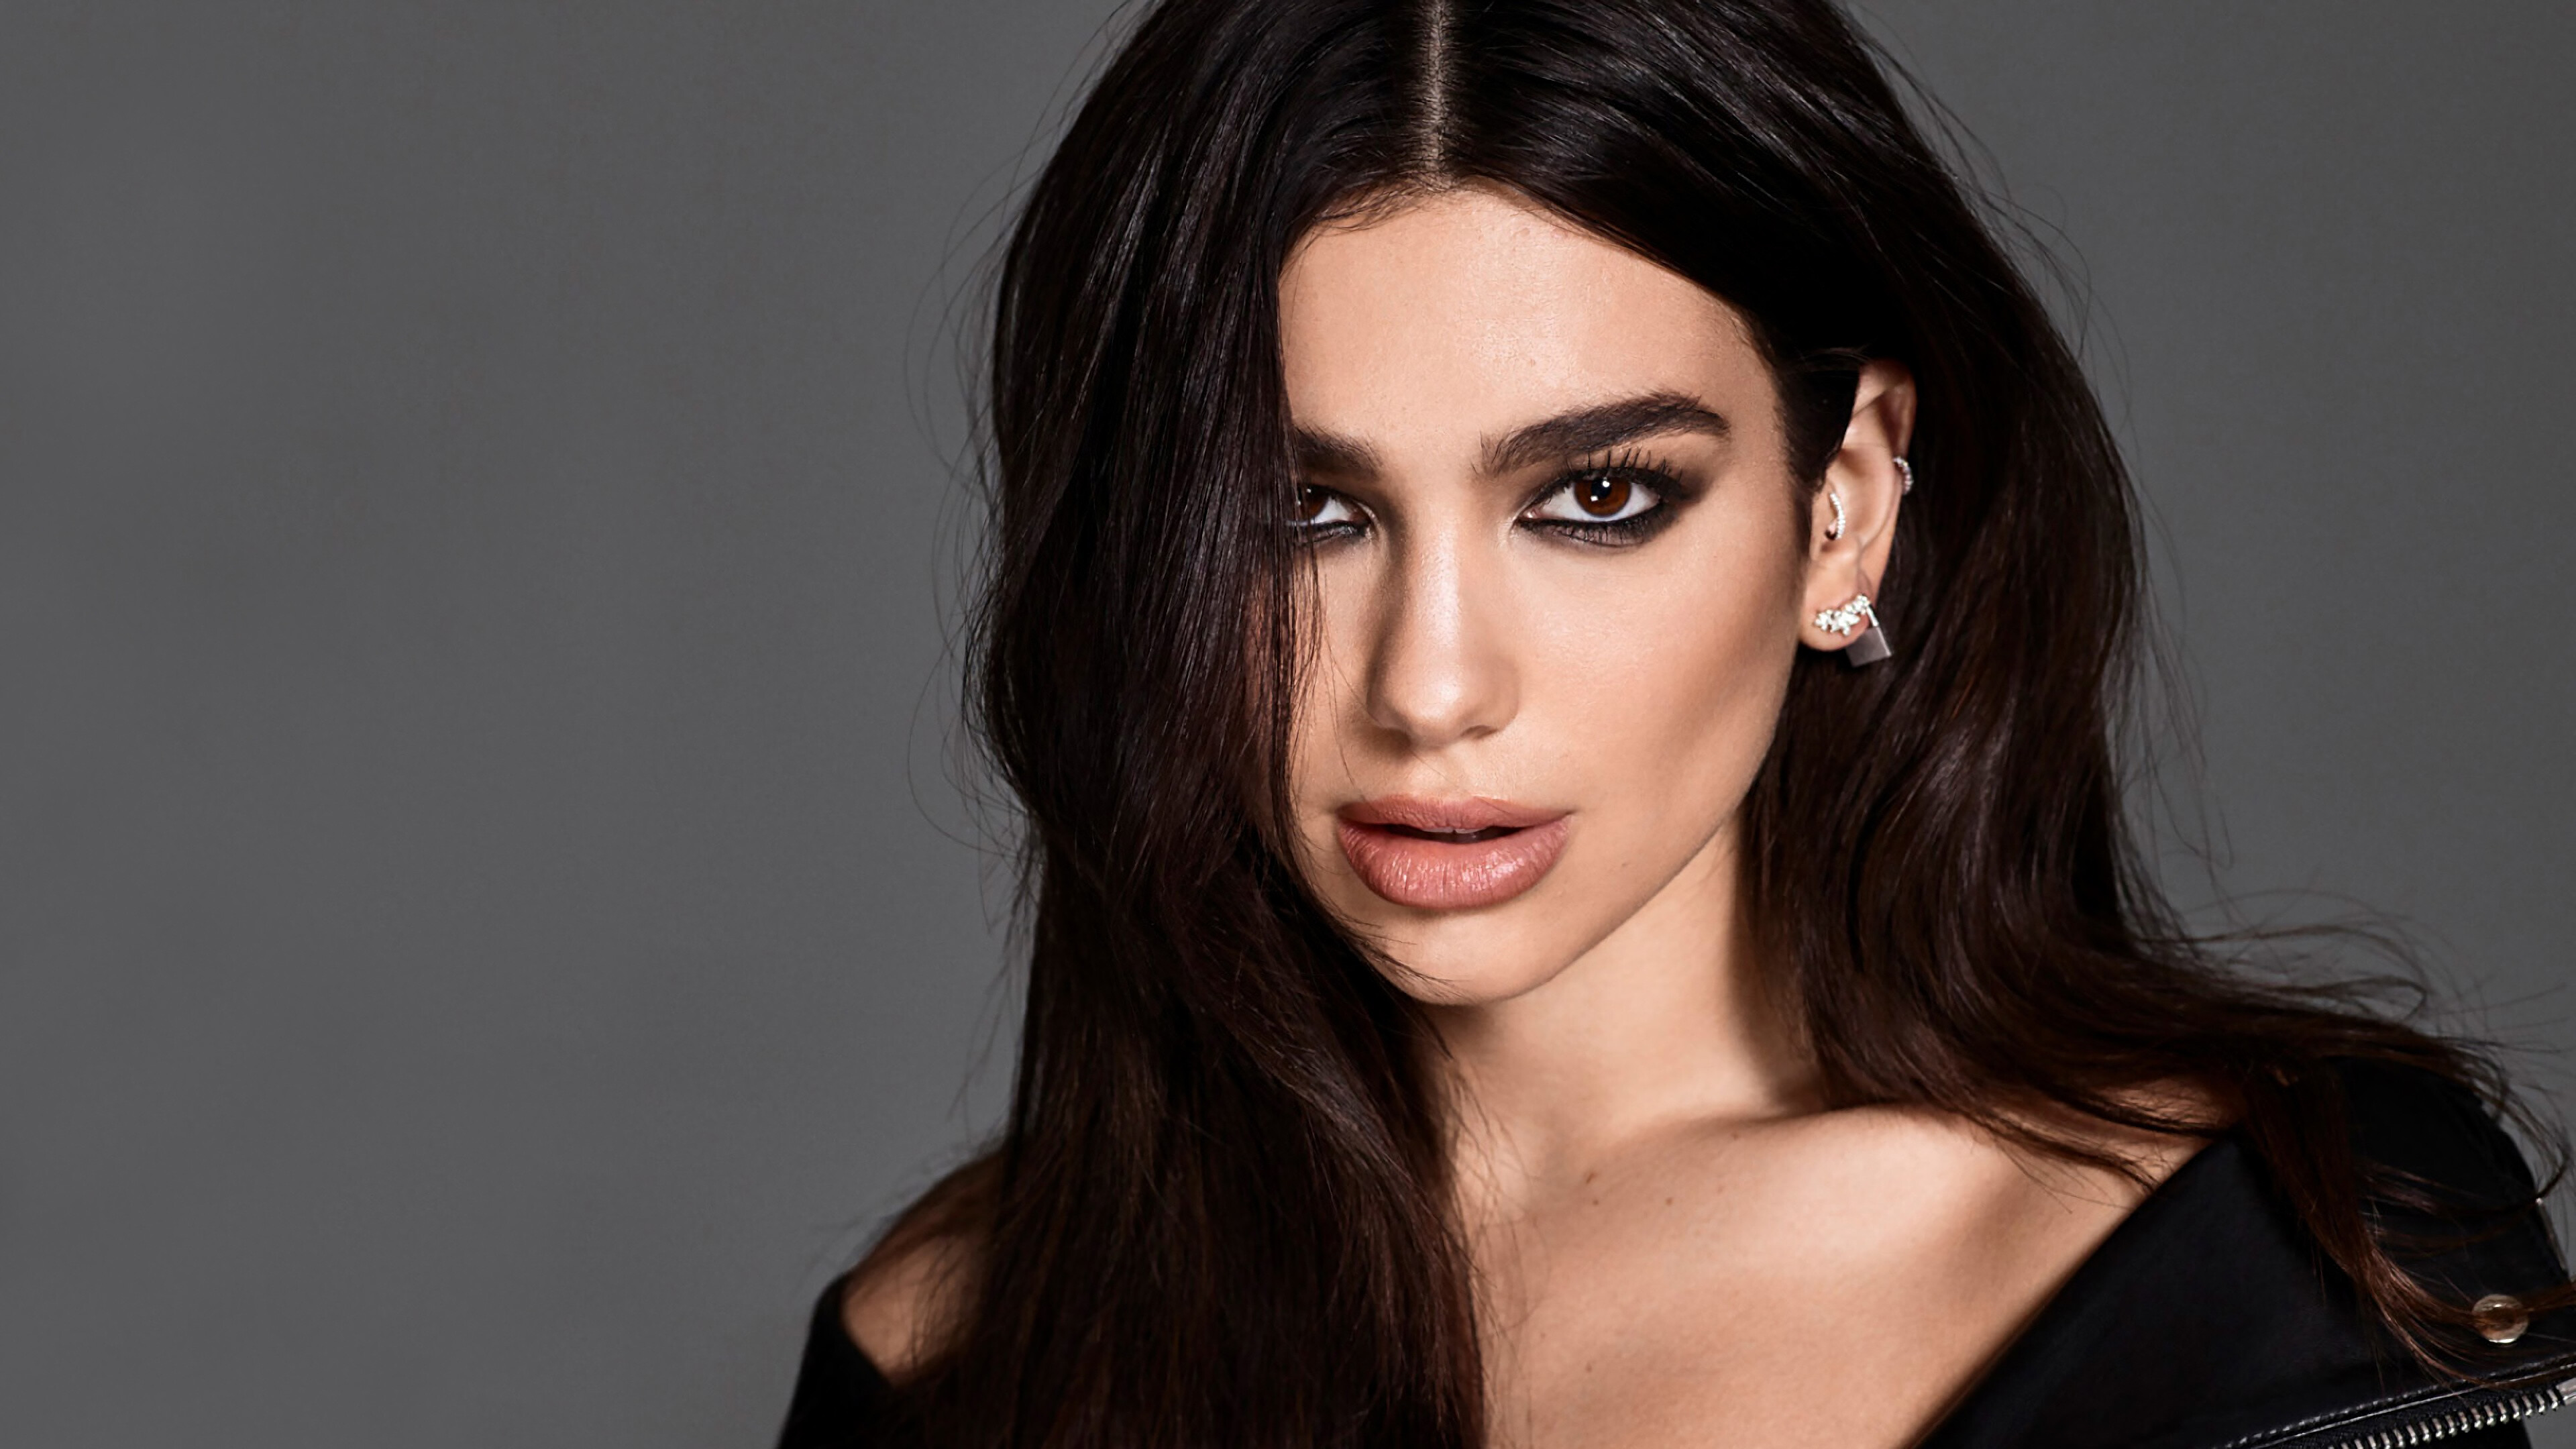 Dua Lipa: "New Rules", "IDGAF", and "One Kiss", were all nominated for British Single of the Year. 3840x2160 4K Background.